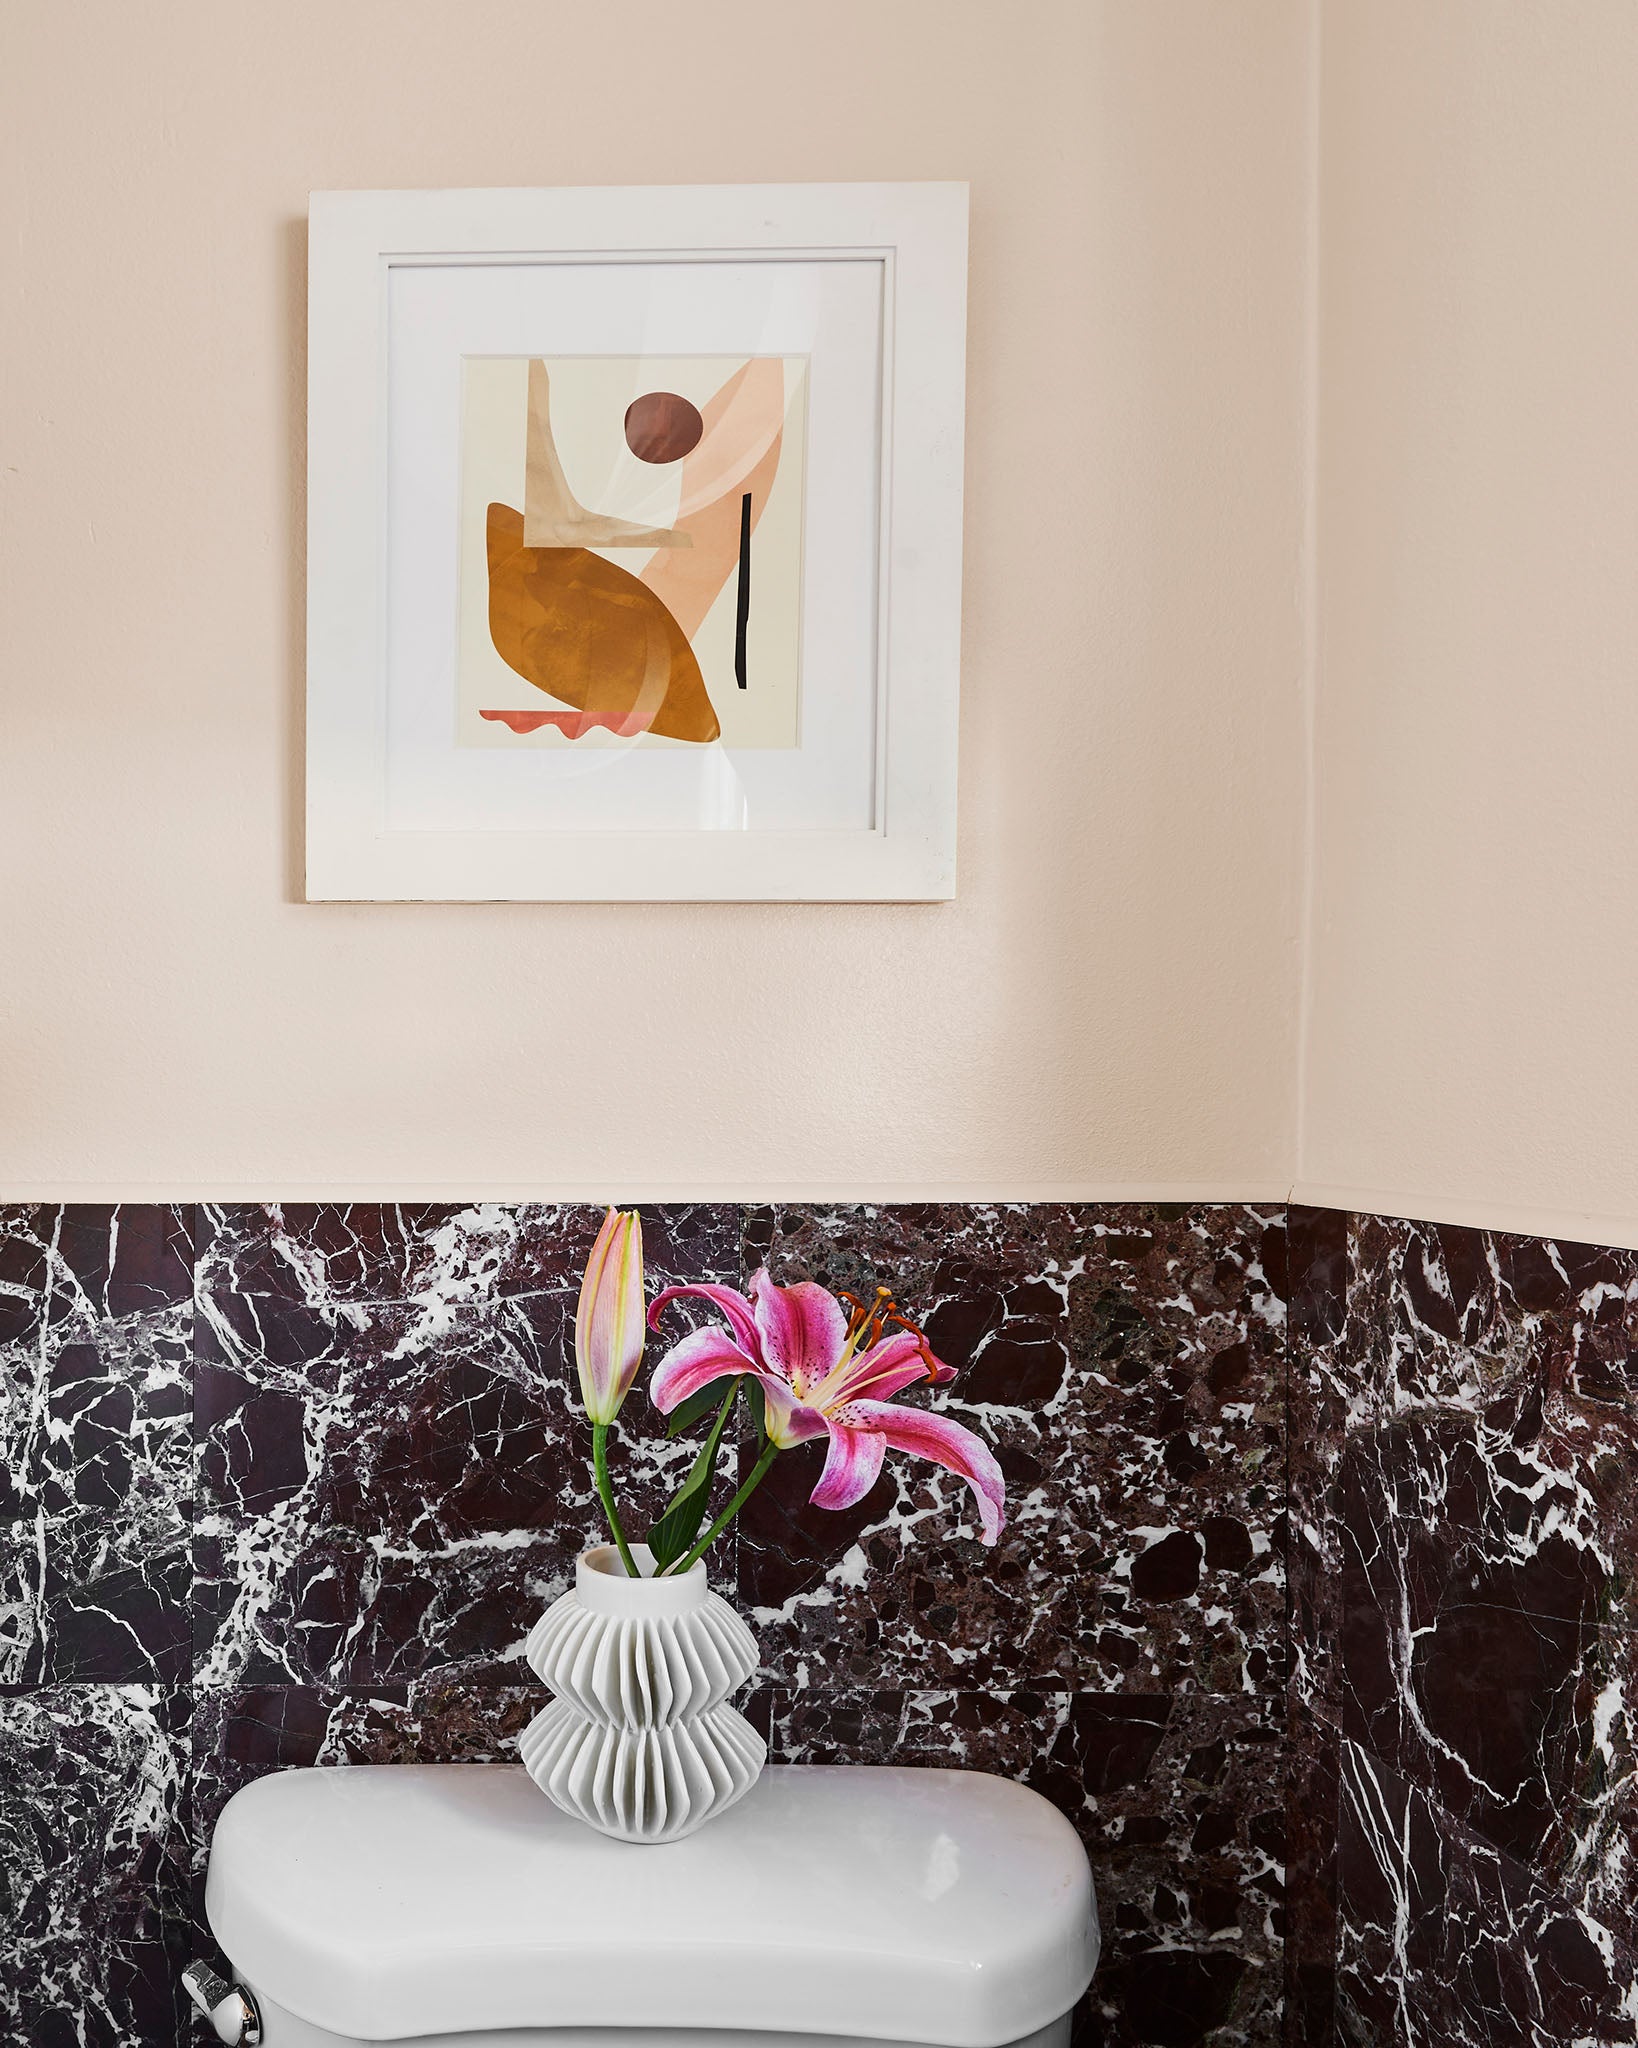 Need fresh ideas for a powder room makeover? Try painting it in an unexpected color.